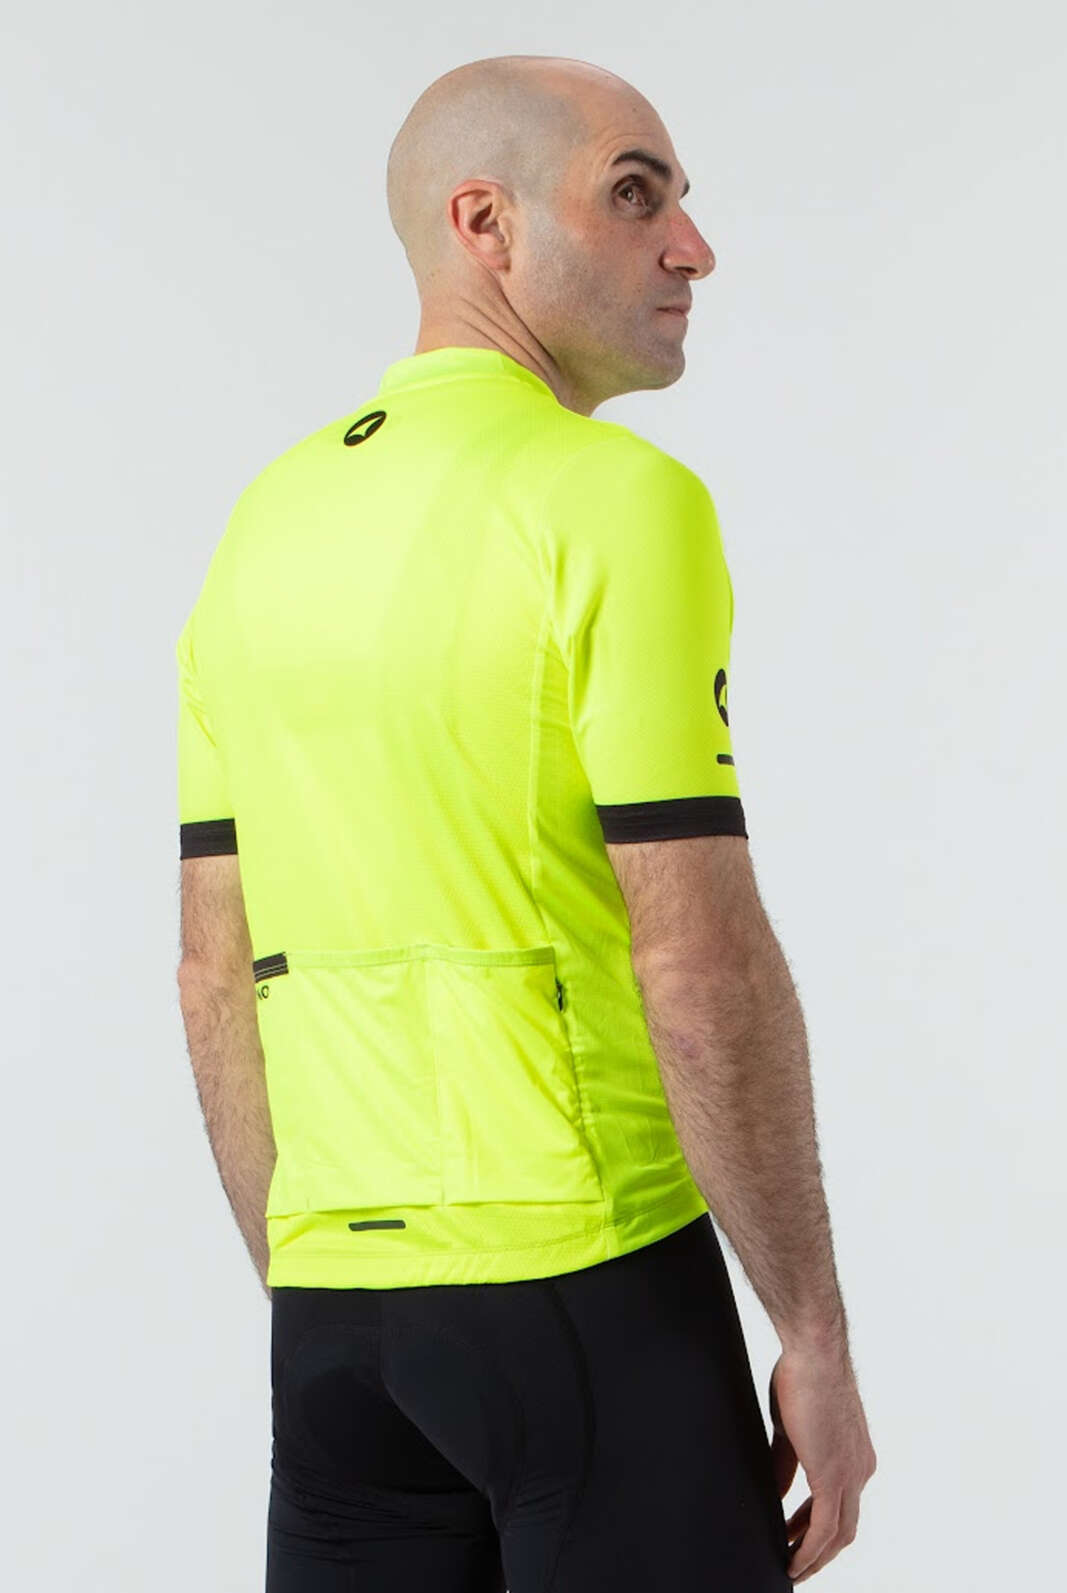 Classic Manic Yellow Ascent Cycling Jersey - Back View